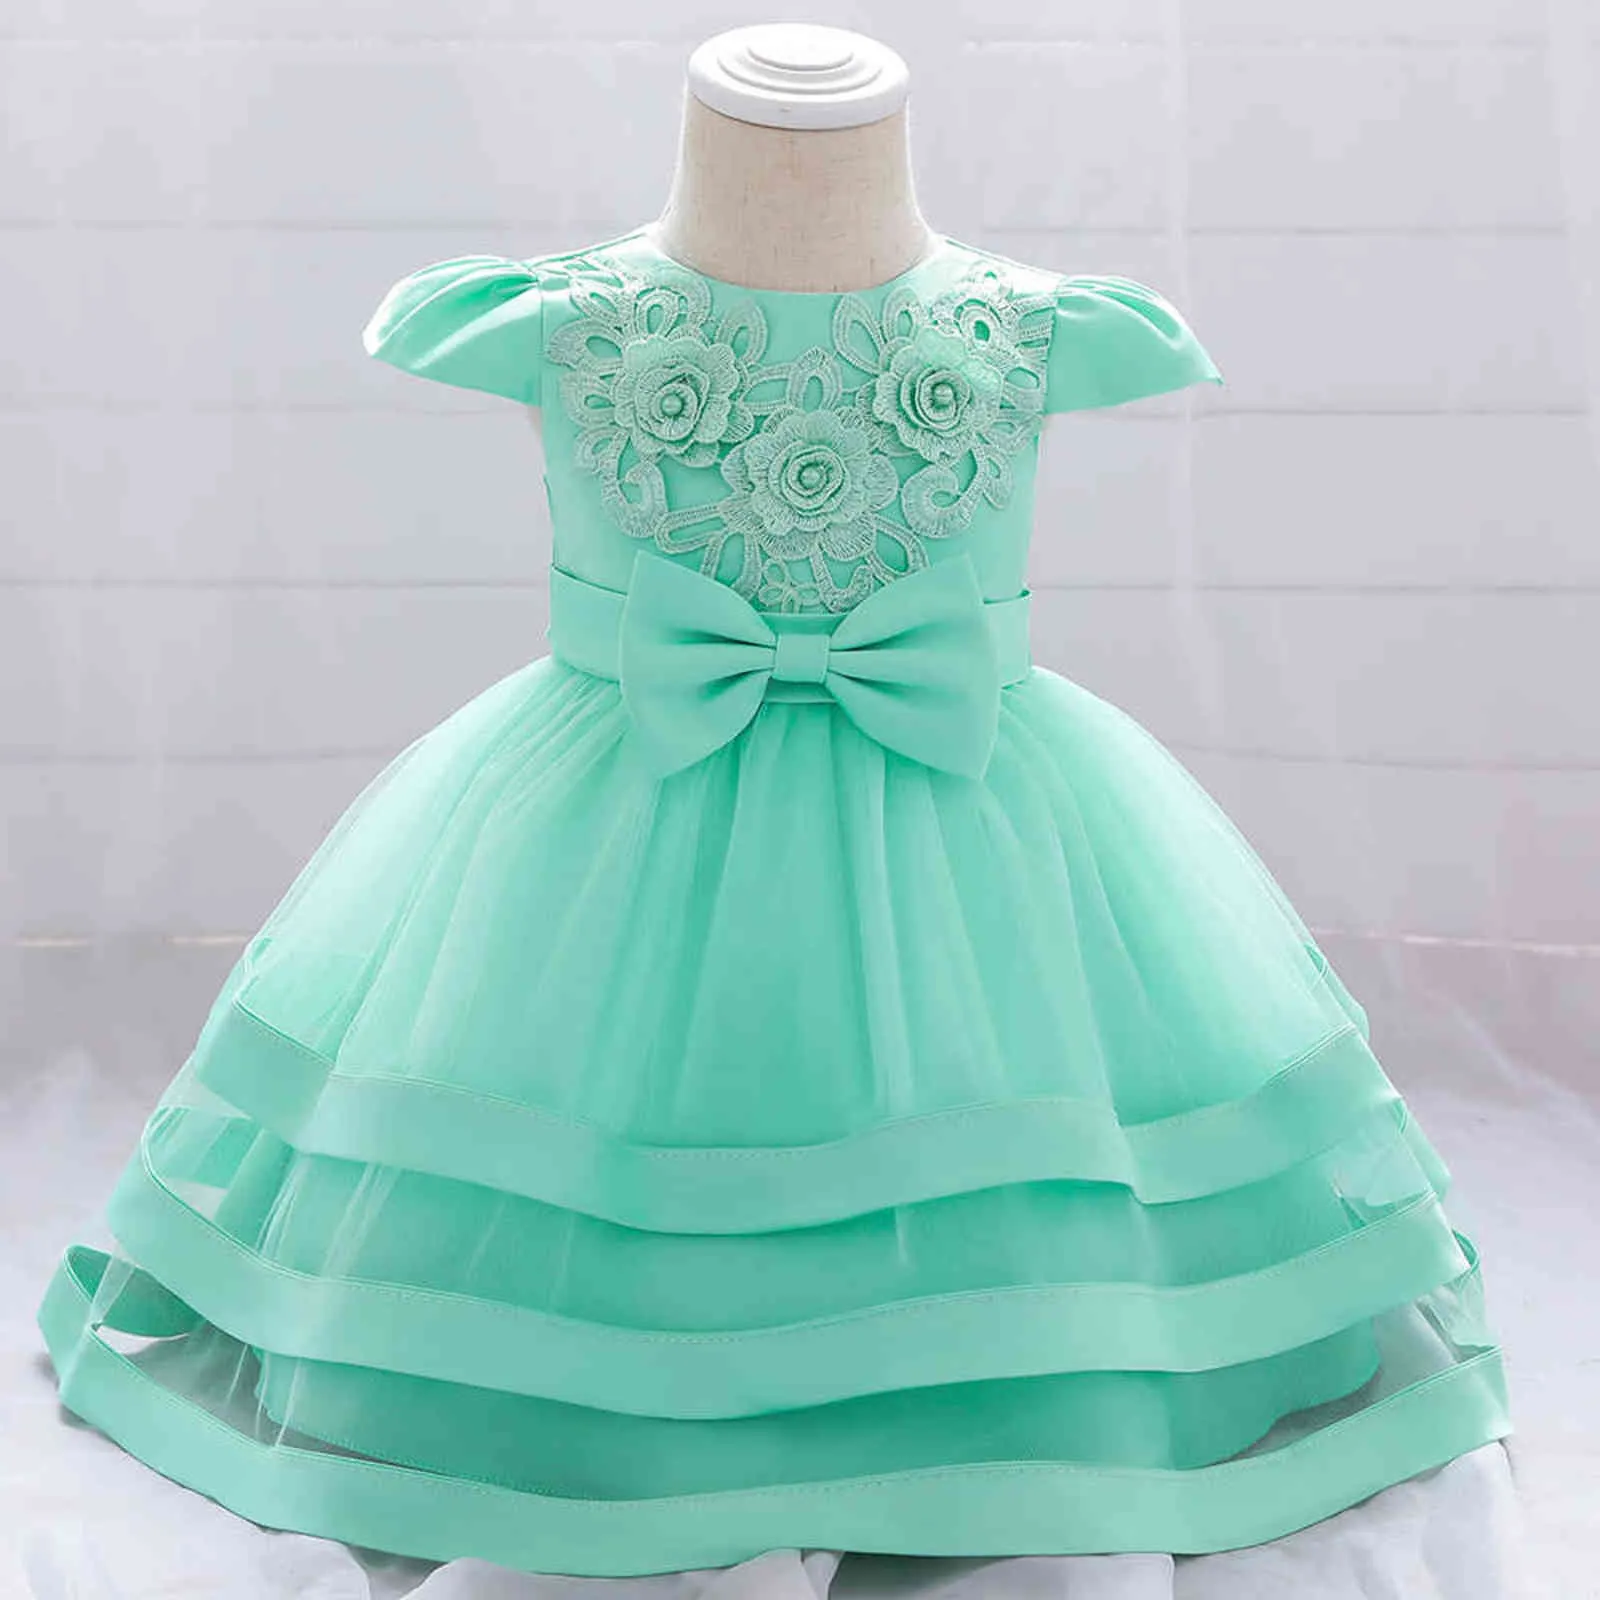 Golden Sequin Tulle Dog Princess Dress For Baby Girls Perfect For  Christening, Baptism, Birthdays And Parties 1 Year L6378204 From U0dt,  $40.69 | DHgate.Com